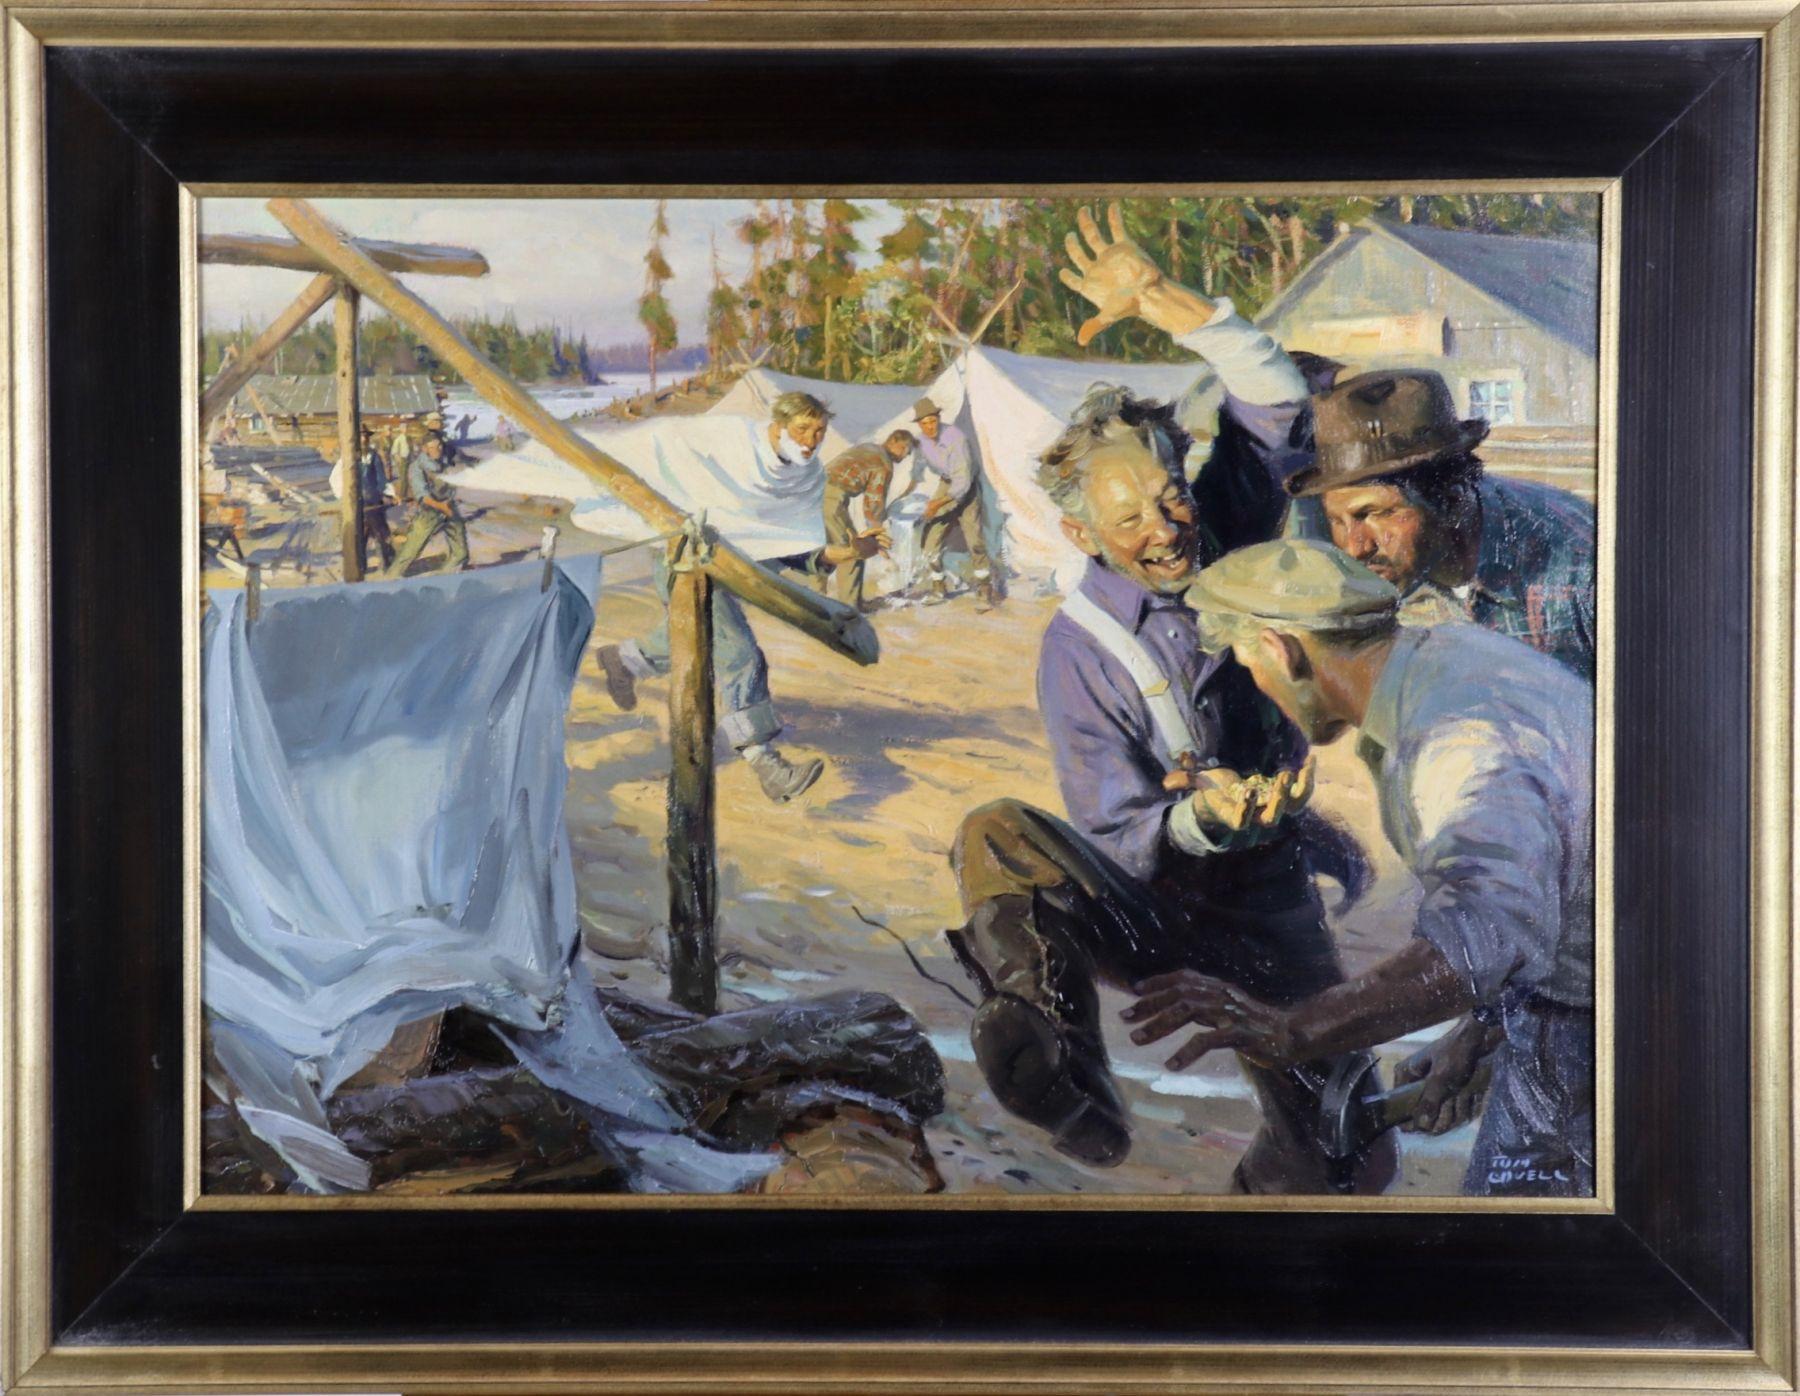 Gold Mining Camp - Painting by Tom Lovell